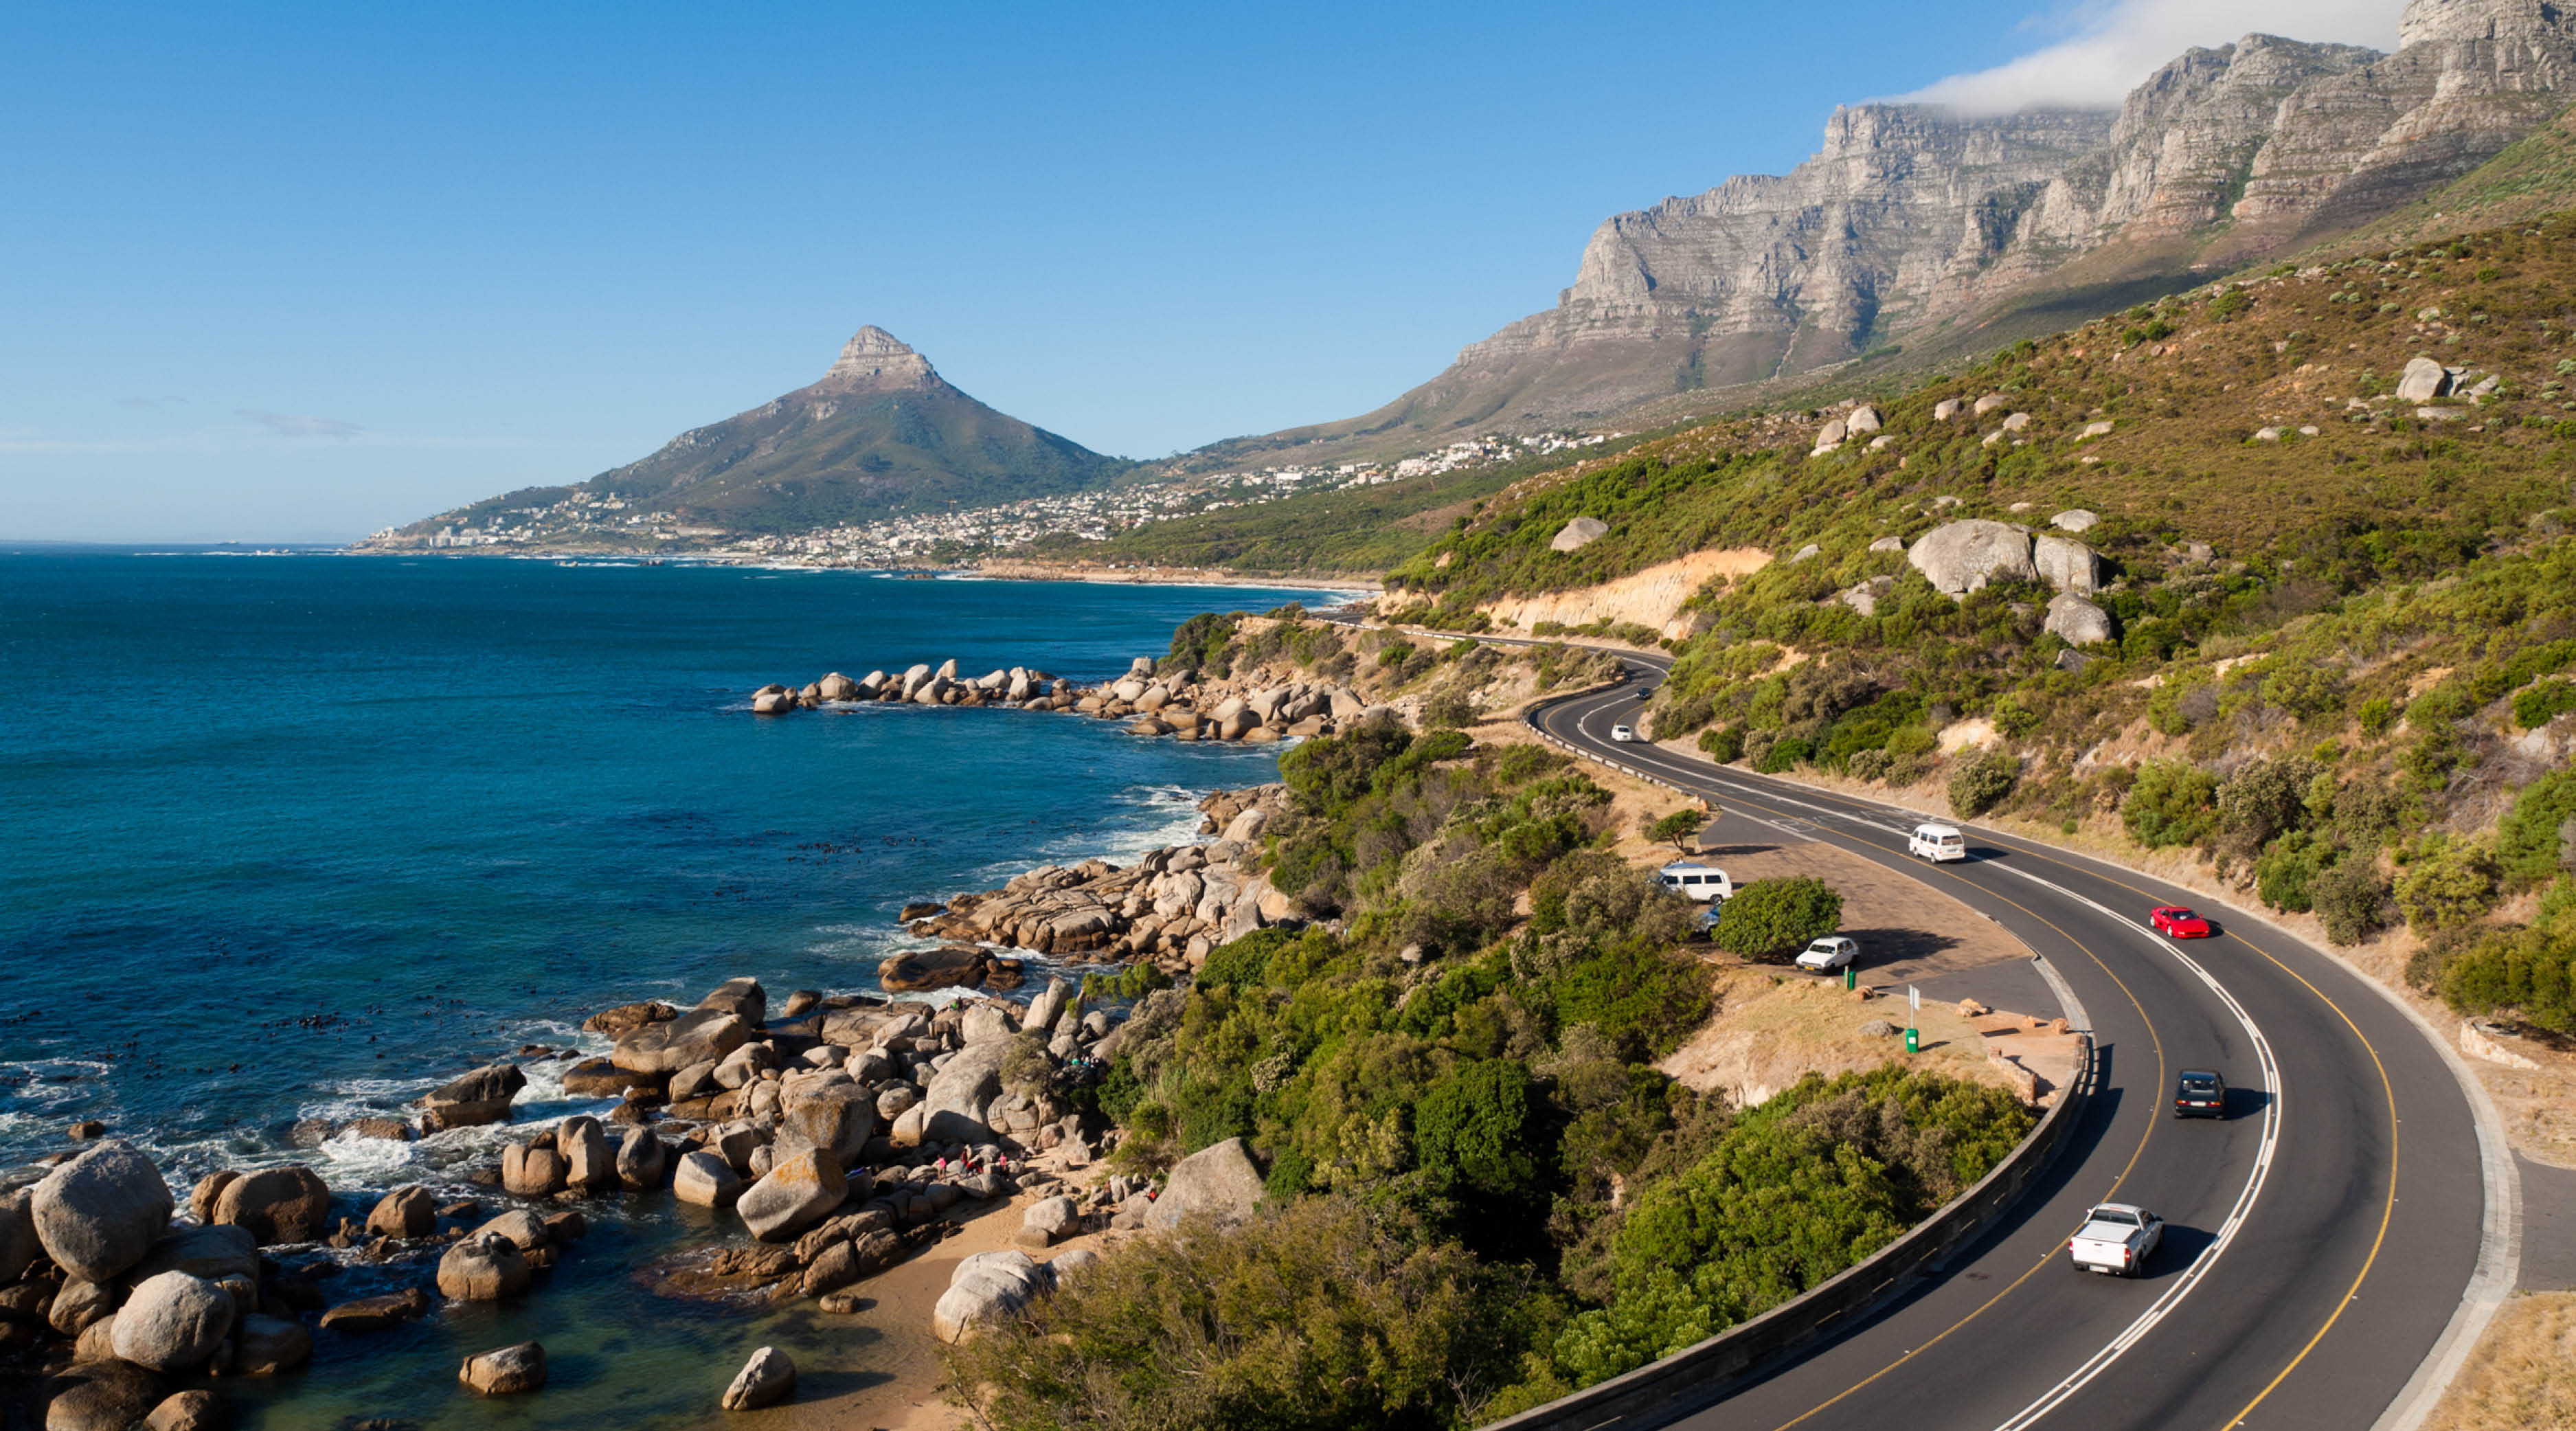 The ultimate South Africa holiday - The Garden Route